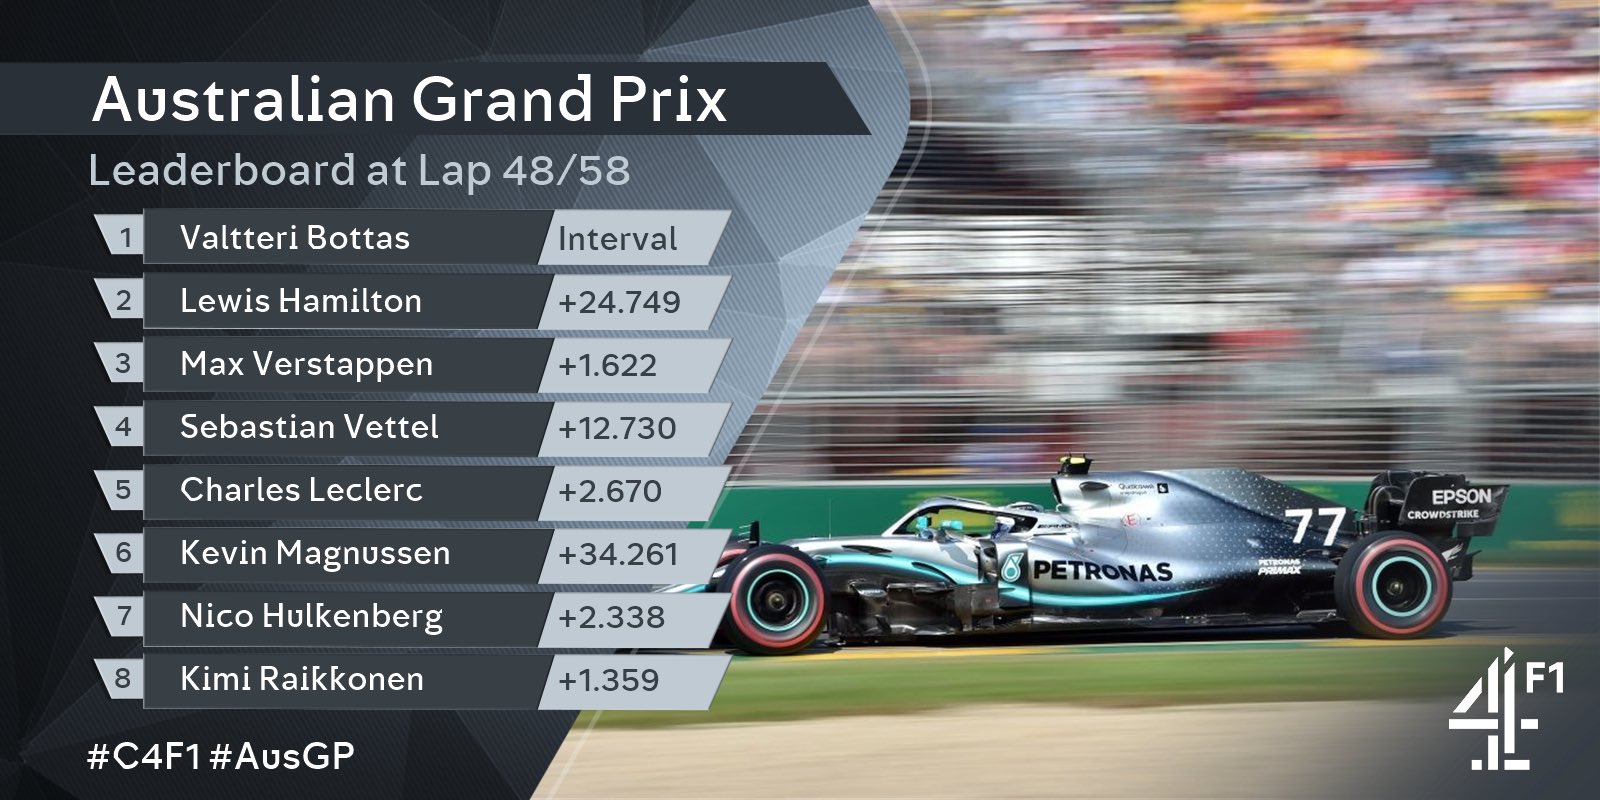 Channel 4 F1 19 Australian Grand Prix Leaderboard For The Final Ten Laps Join Us Now For Race Highlights On Channel4 And All4 C4f1 Ausgp T Co 5dz8uqx0rz